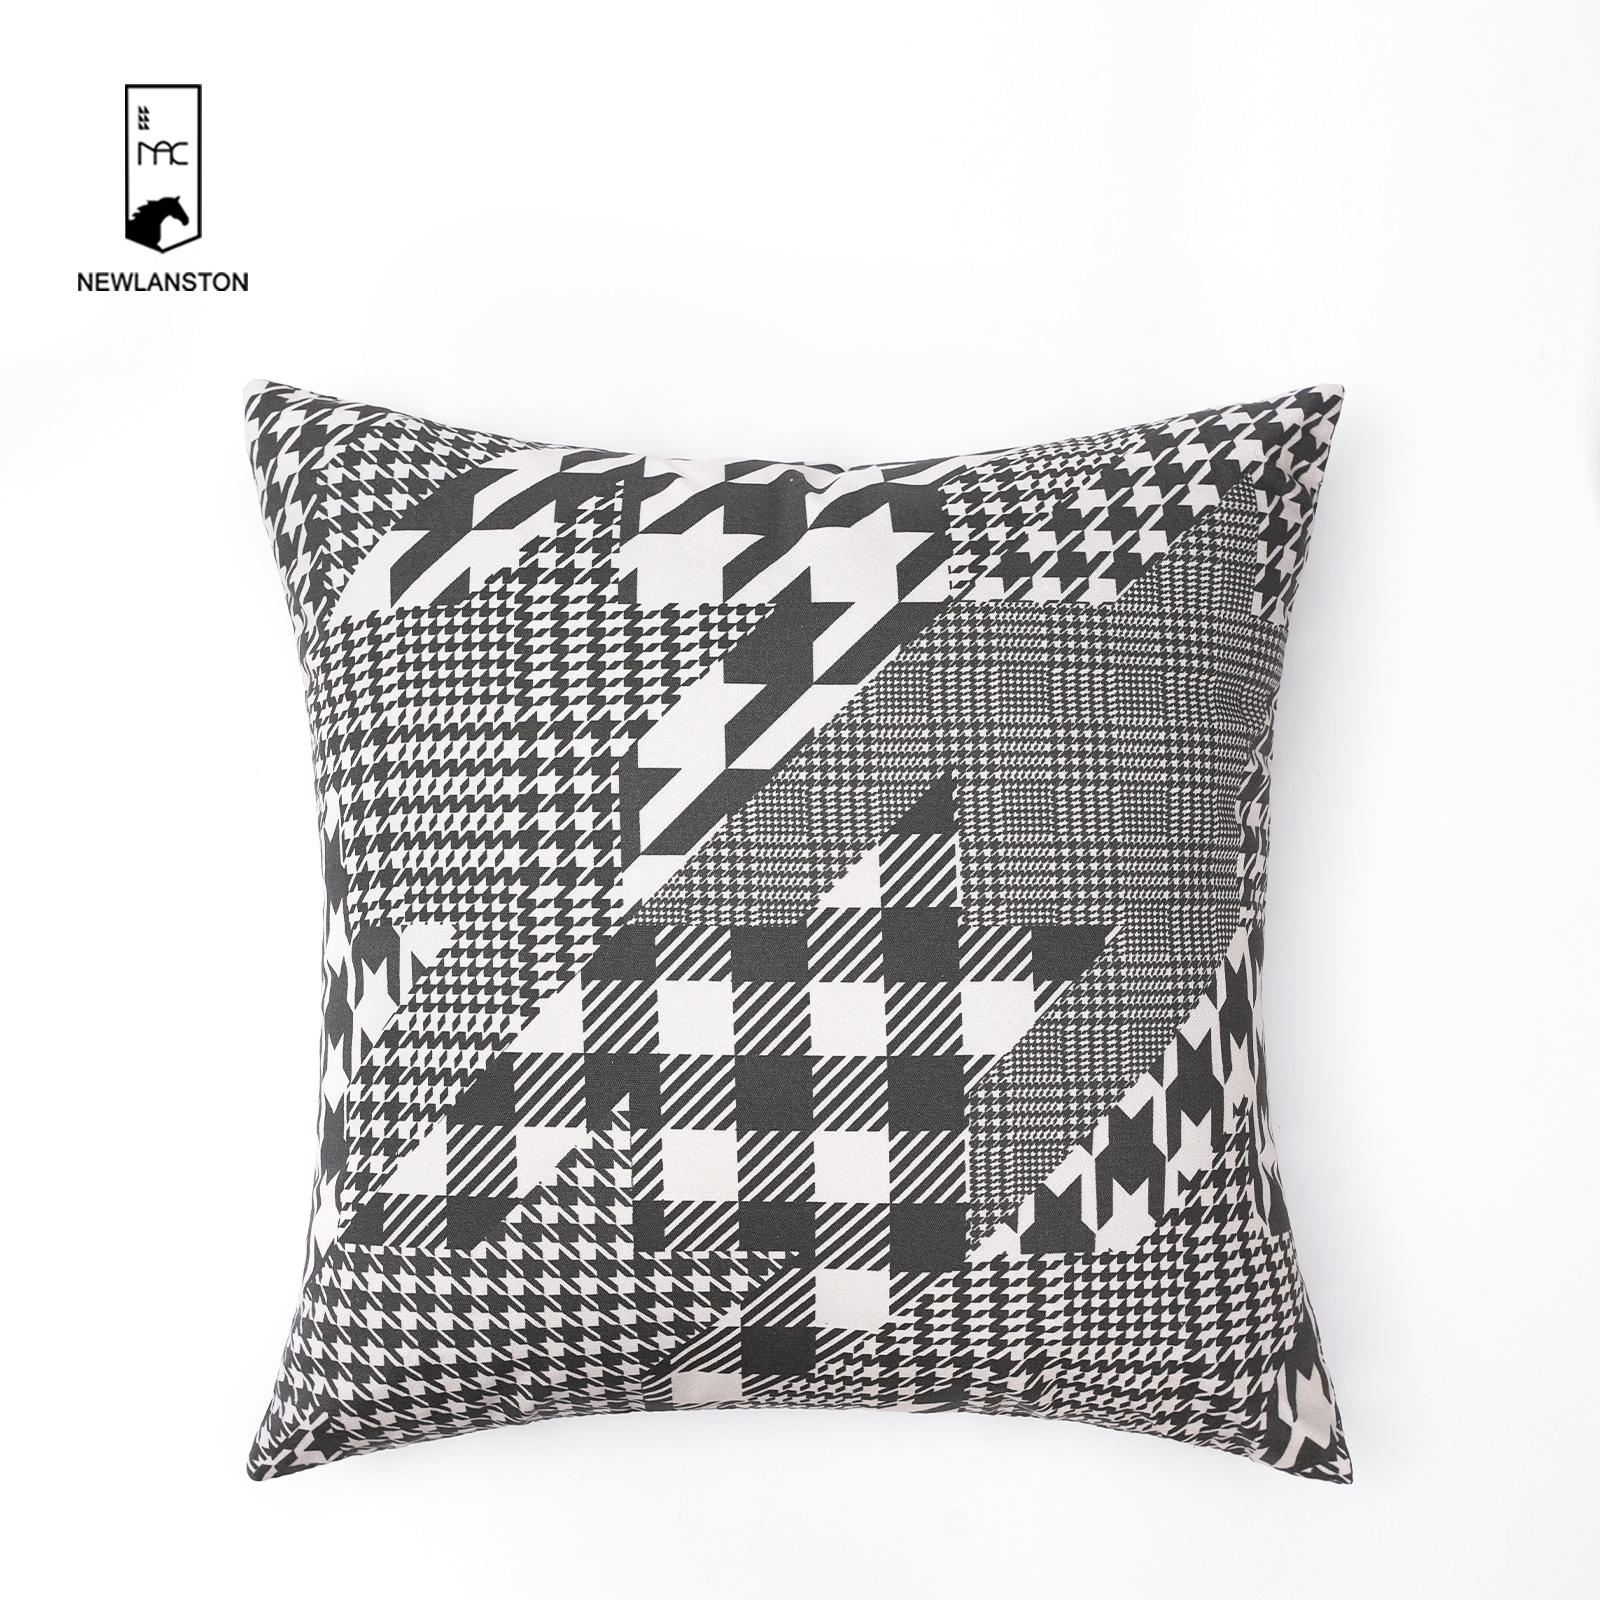 45x45 Digital printed recycled cotton Geometric style Cushion cover 